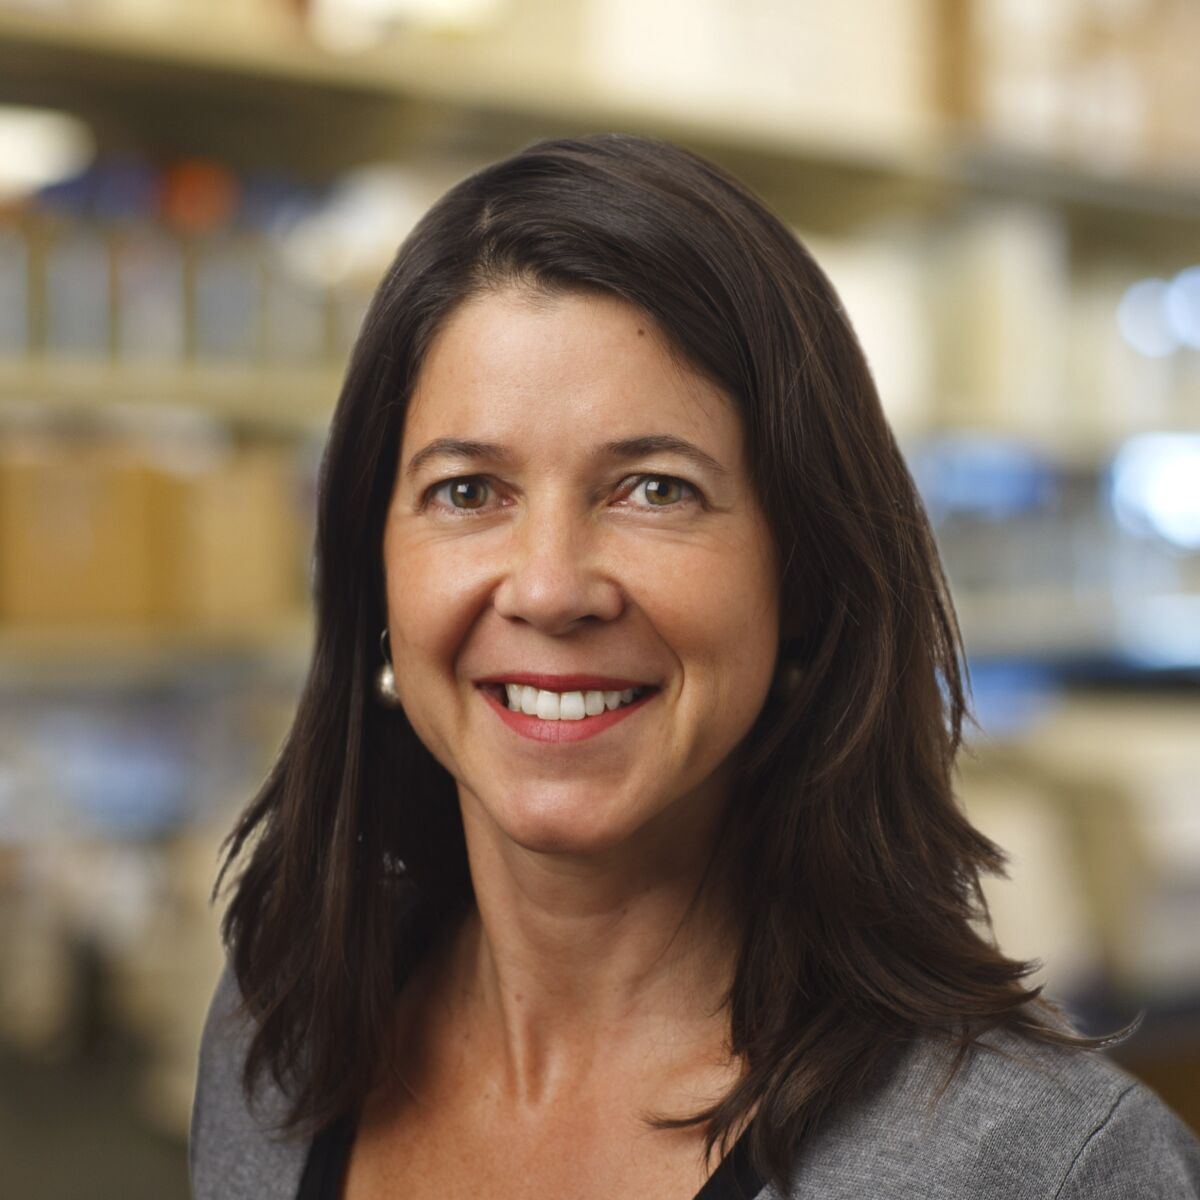 Susana Valente will speak on "Silencing the HIV Reservoir: The ‘Block and Lock’ Approach" via Scripps Research on Dec. 16.